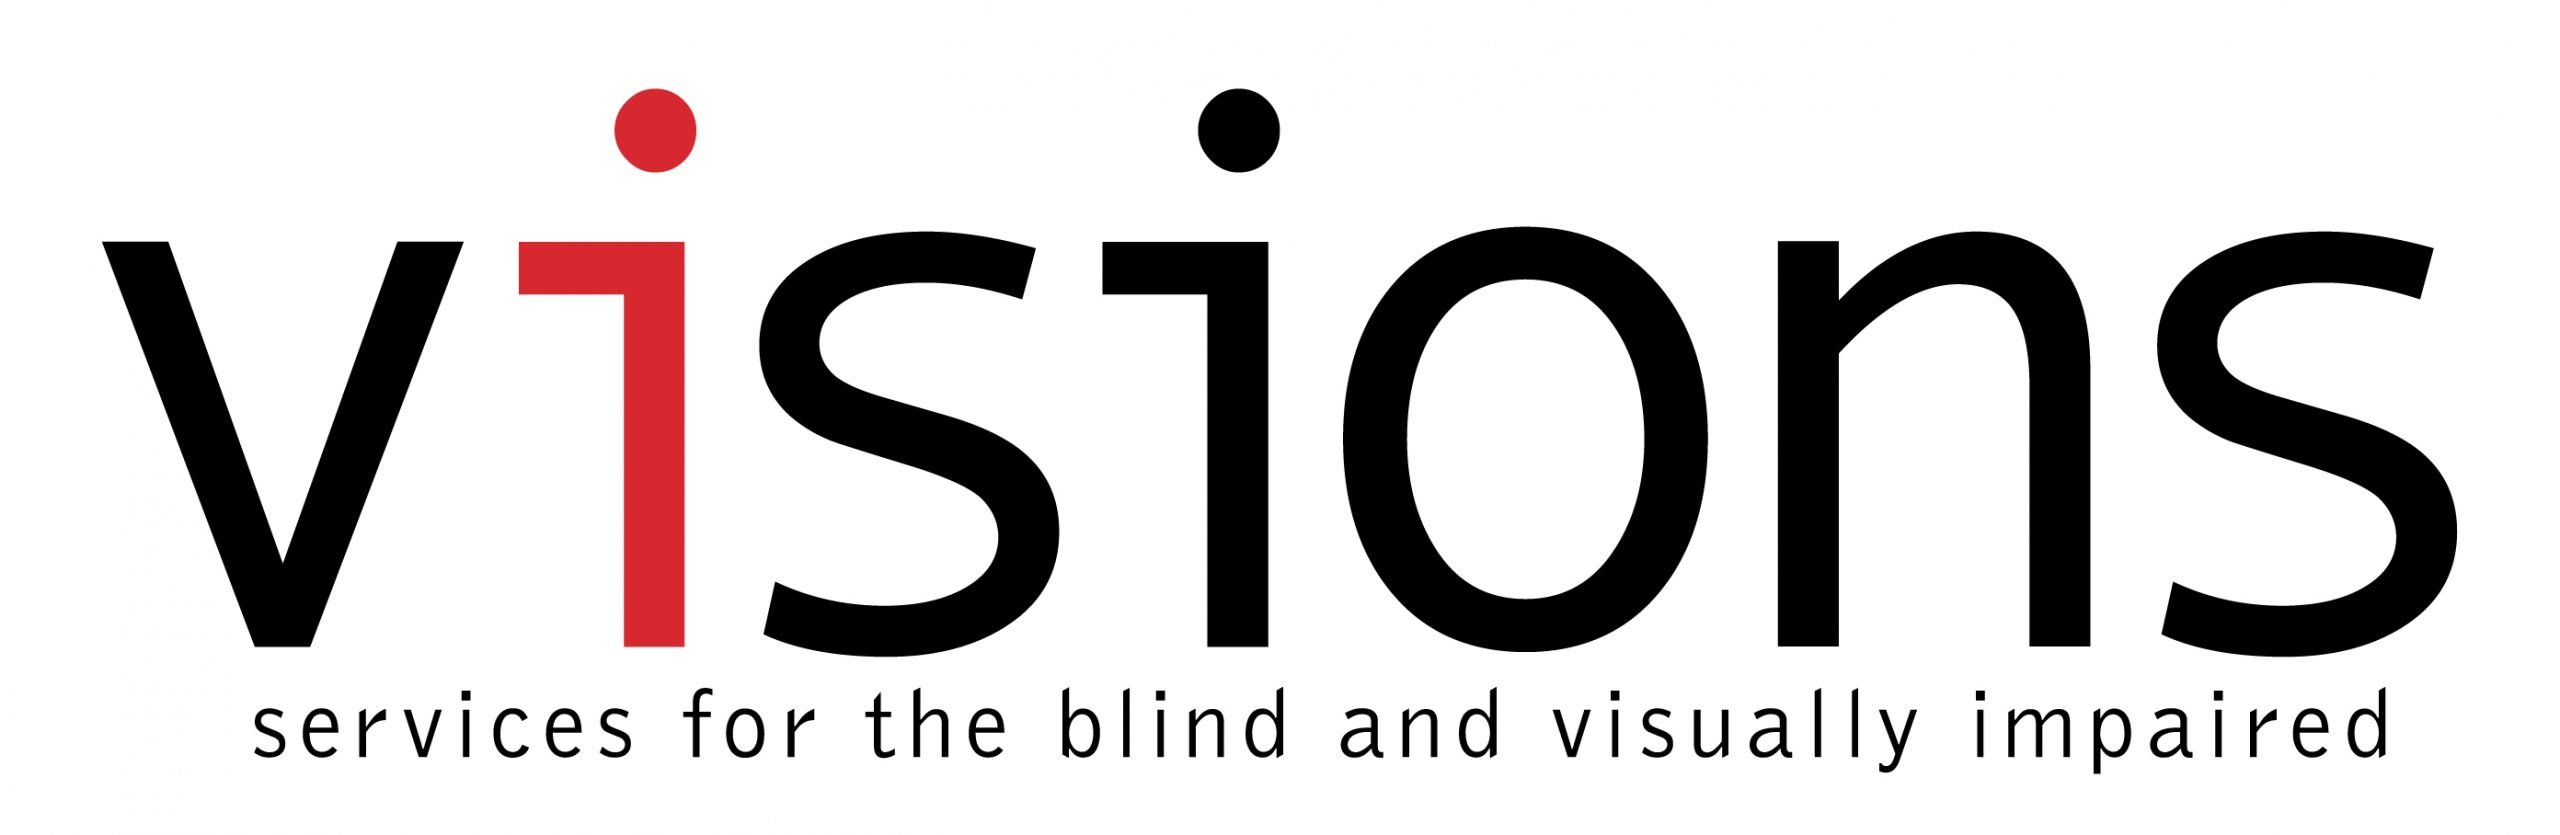 VISIONS/Services for the Blind and Visually Impaired